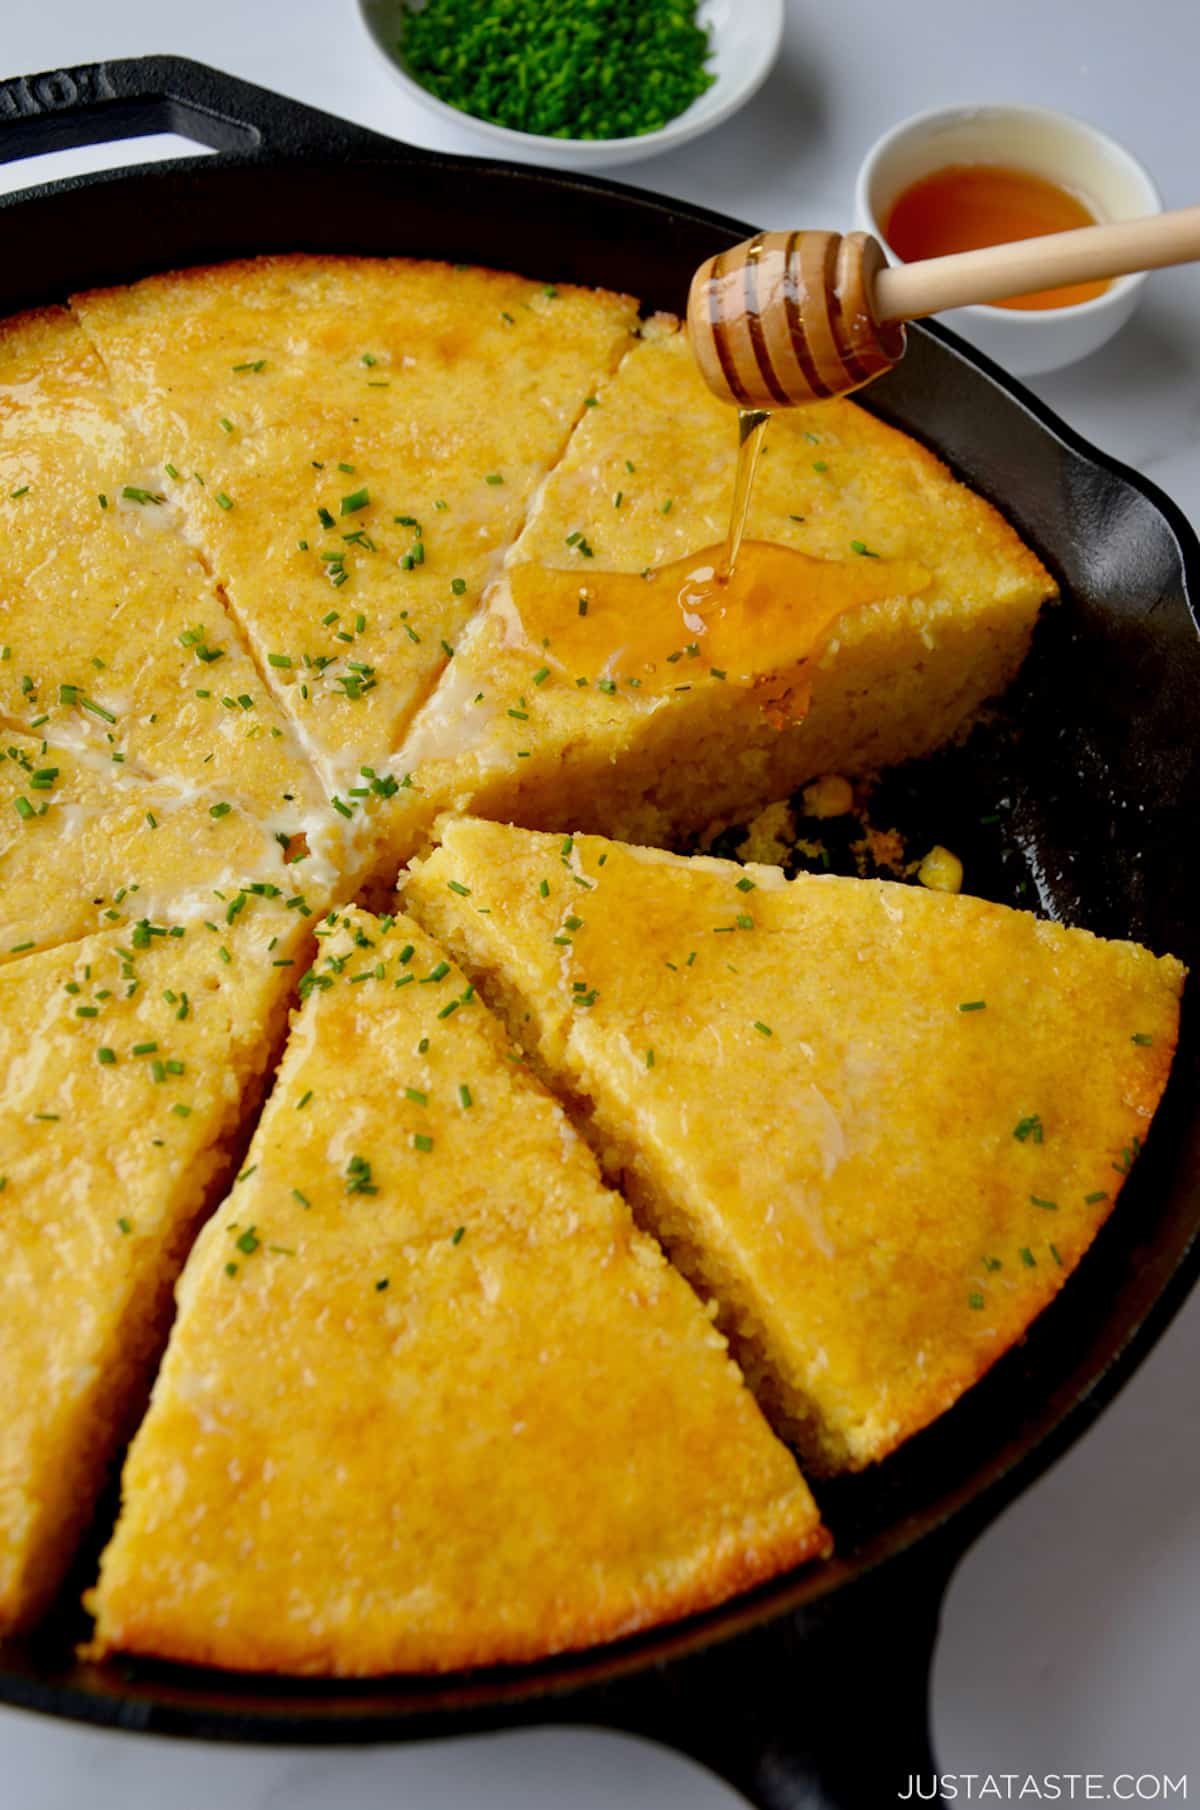 Honey being drizzled over sliced cornbread in a cast iron pan. The cornbread is topped with butter and minced chives and small bowls of more chives and honey are beside the skillet.